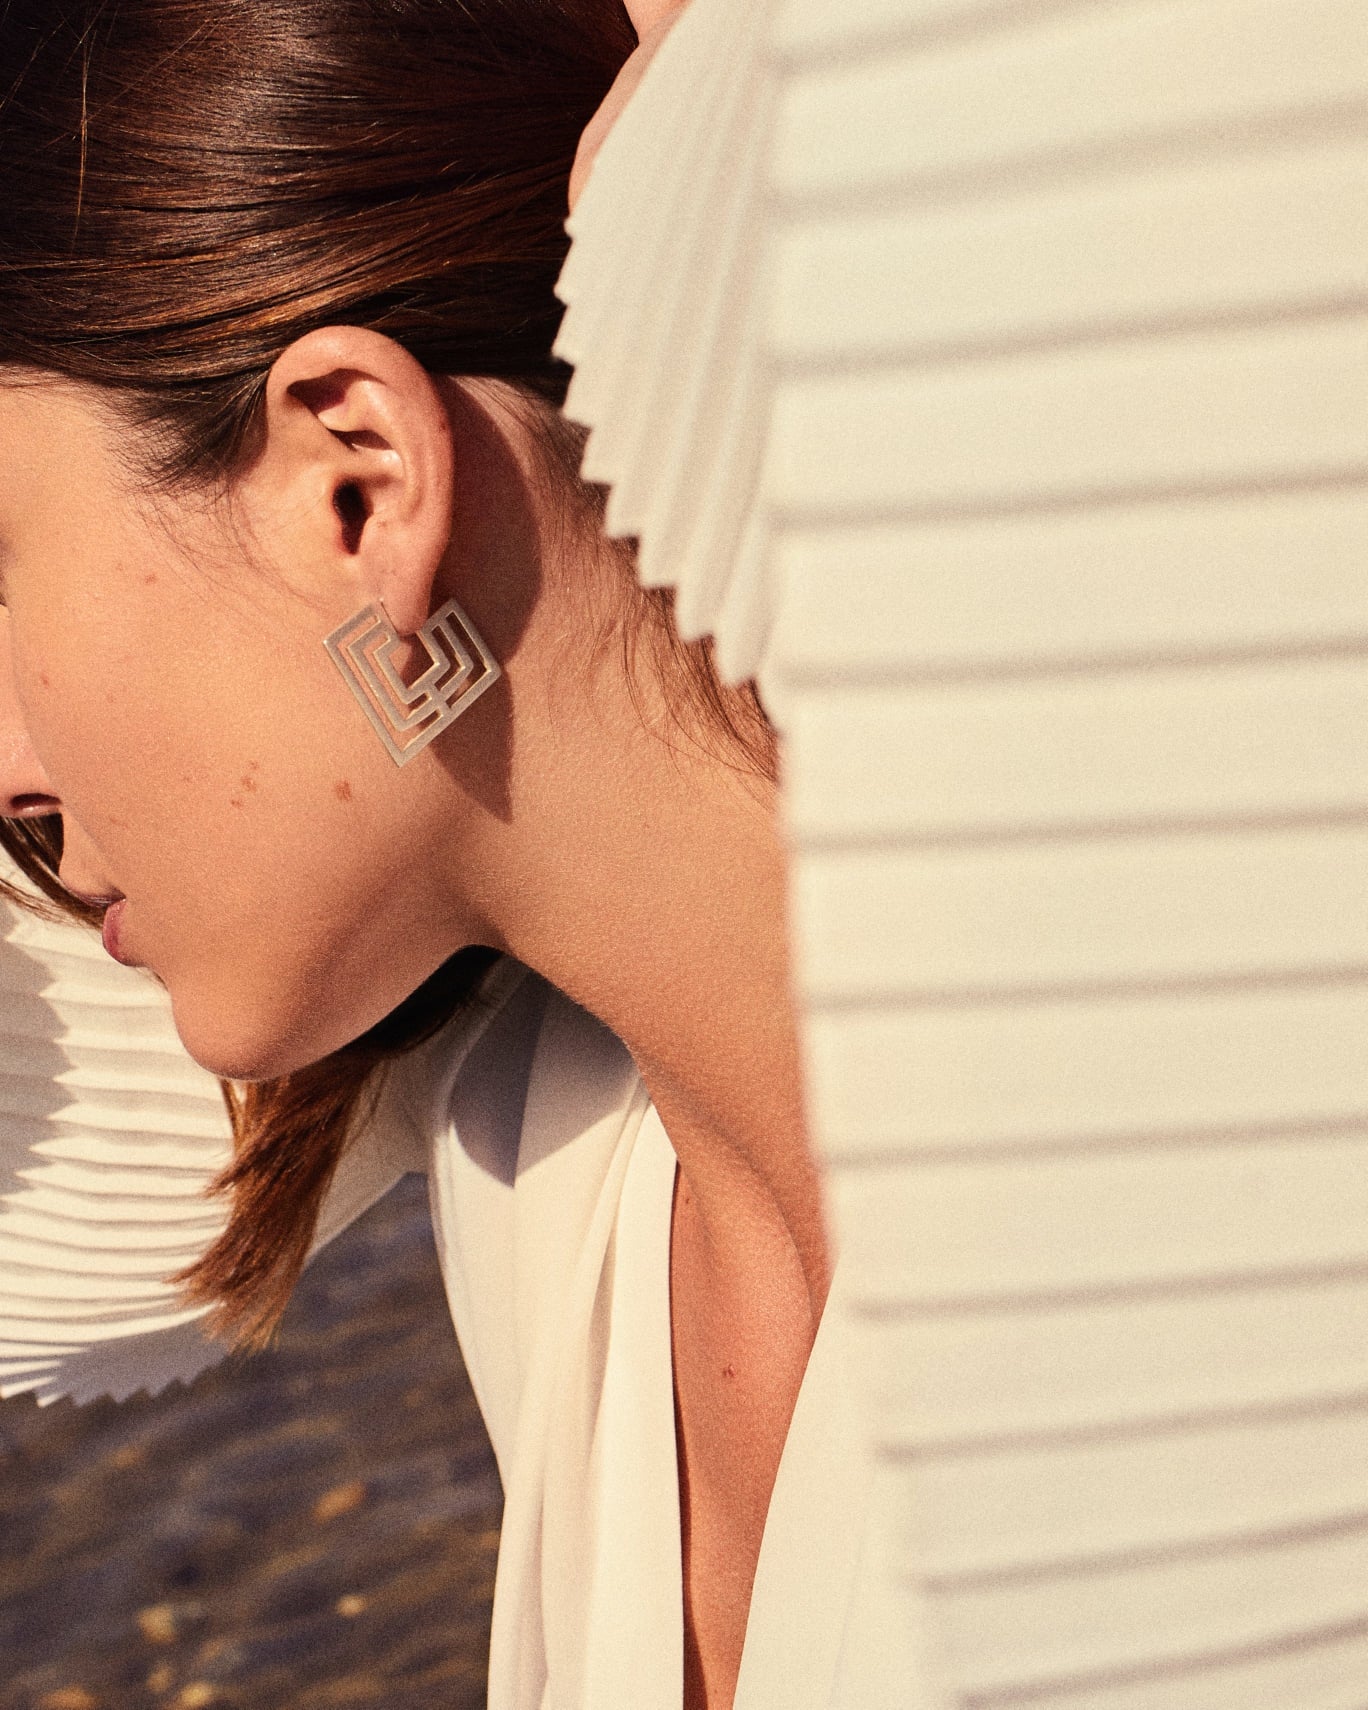 The Introspect Square Earrings